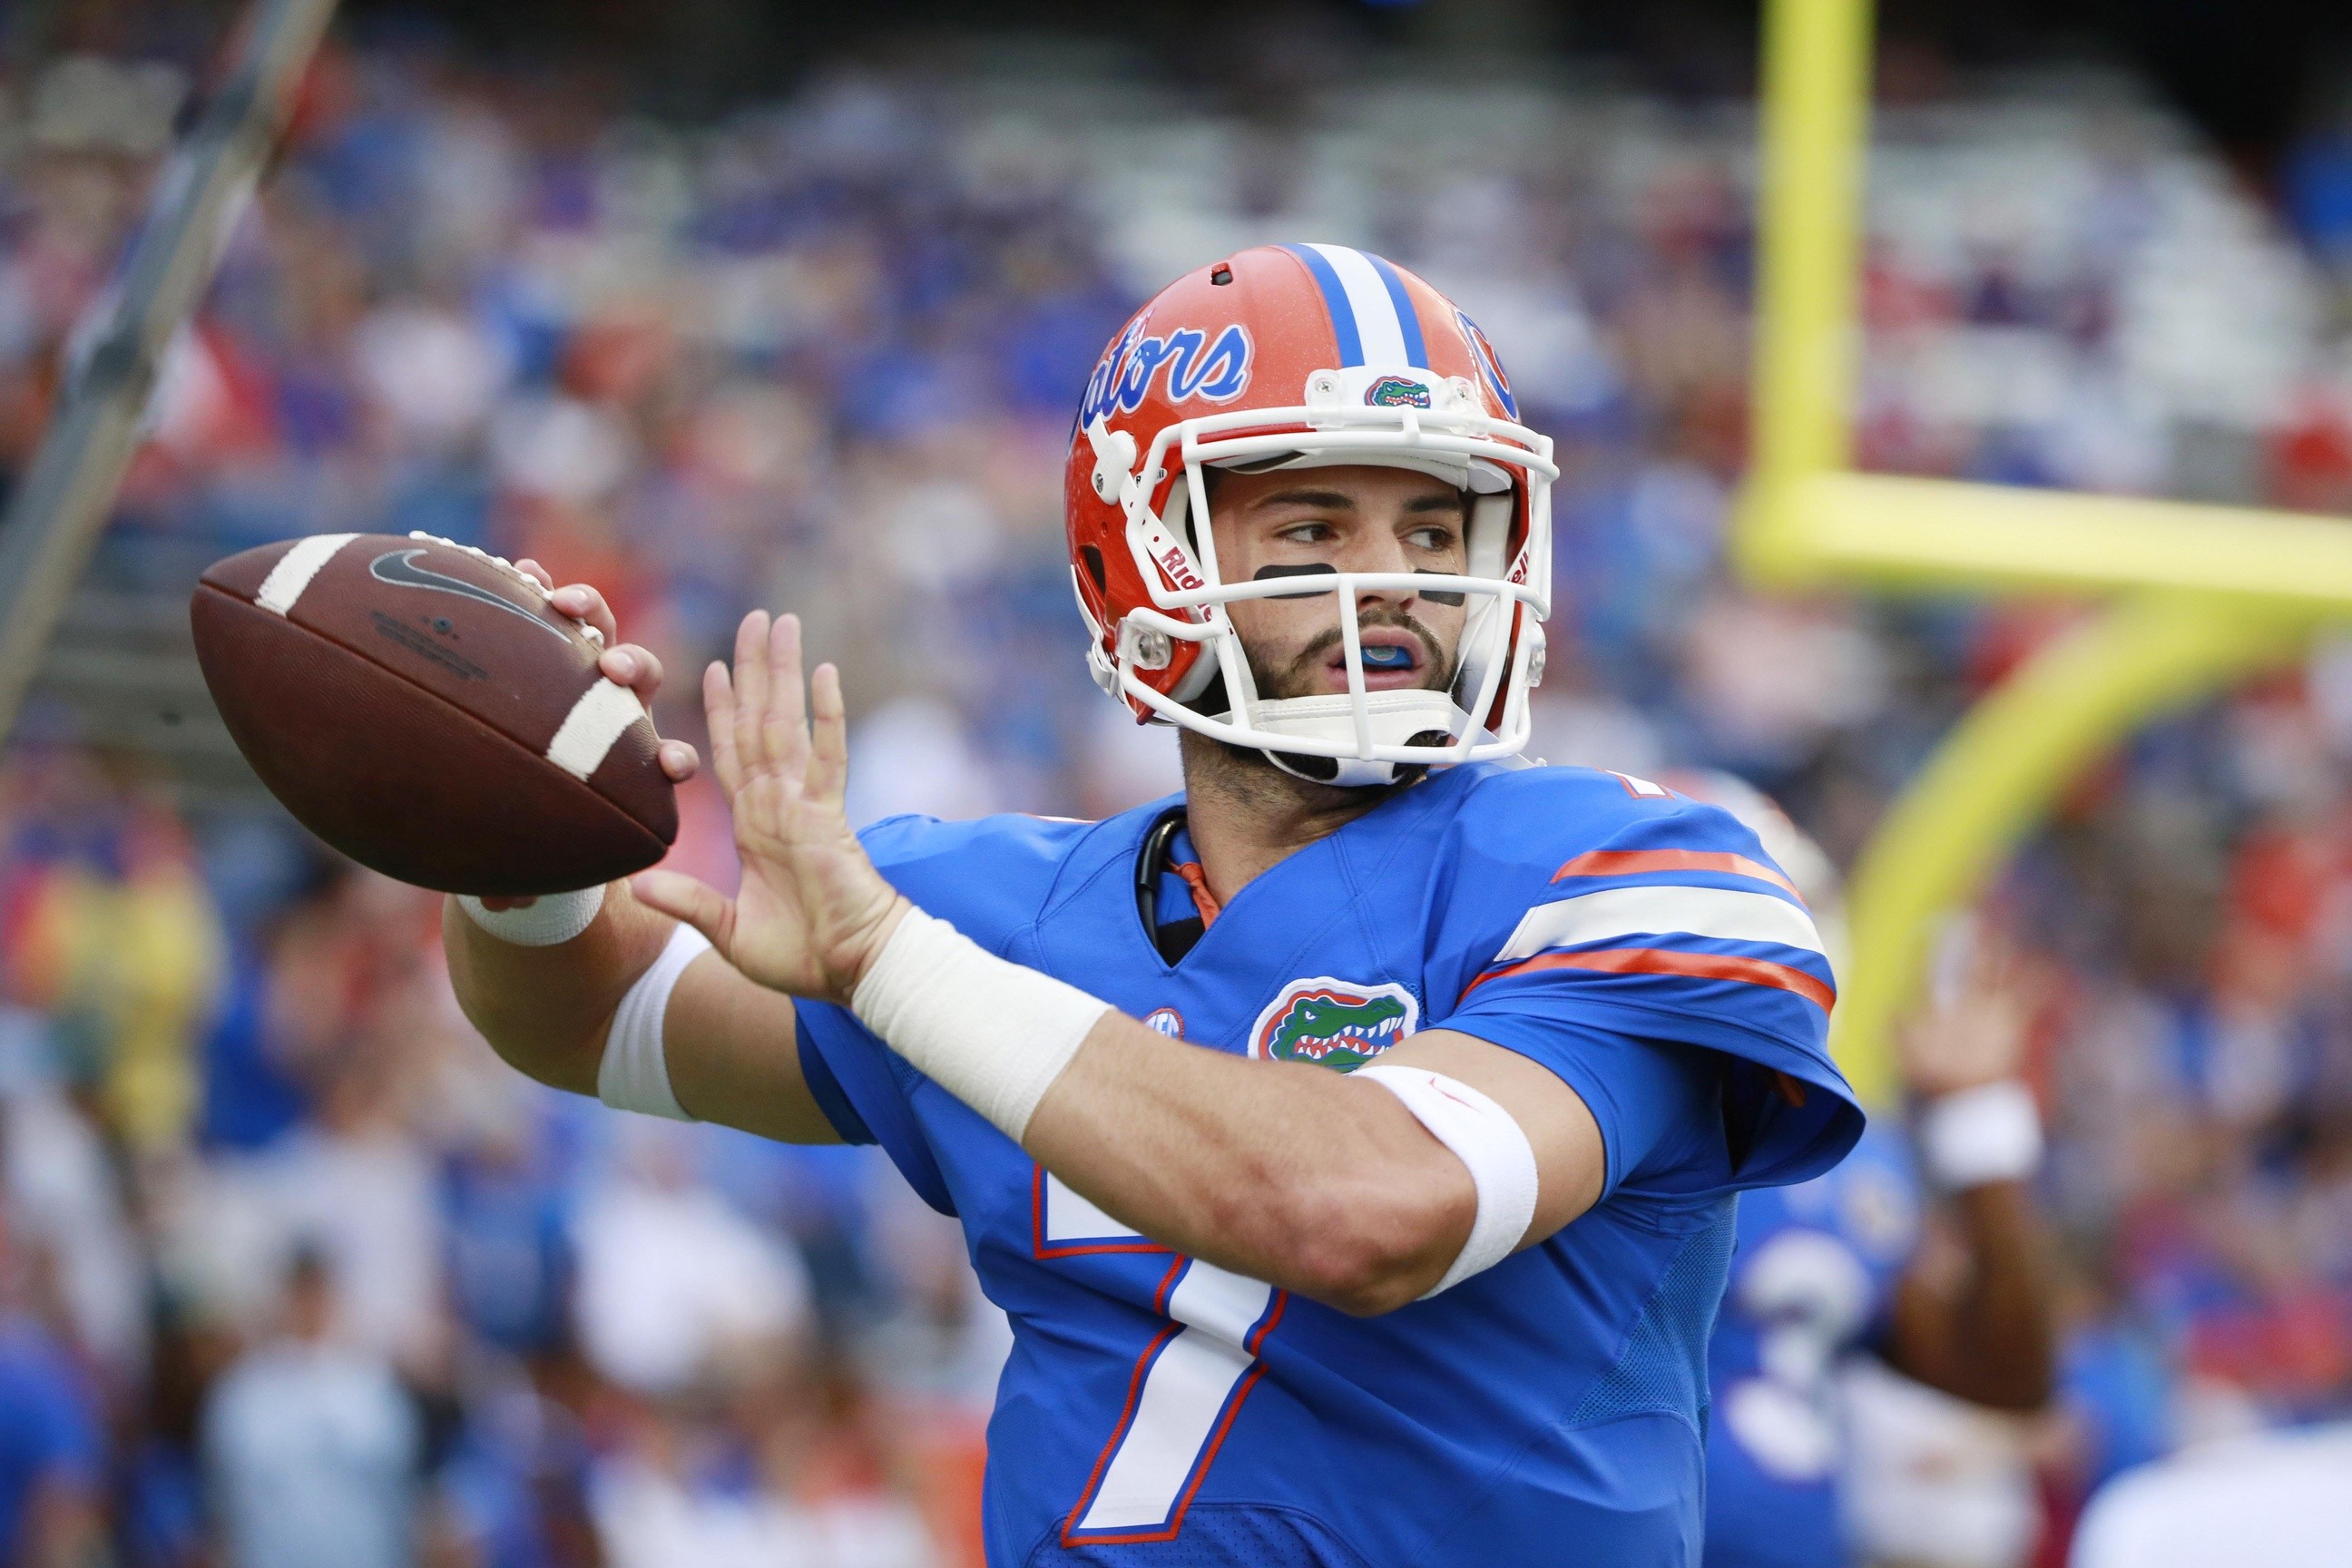 Can the Florida Gators thrive in a twoQB system?